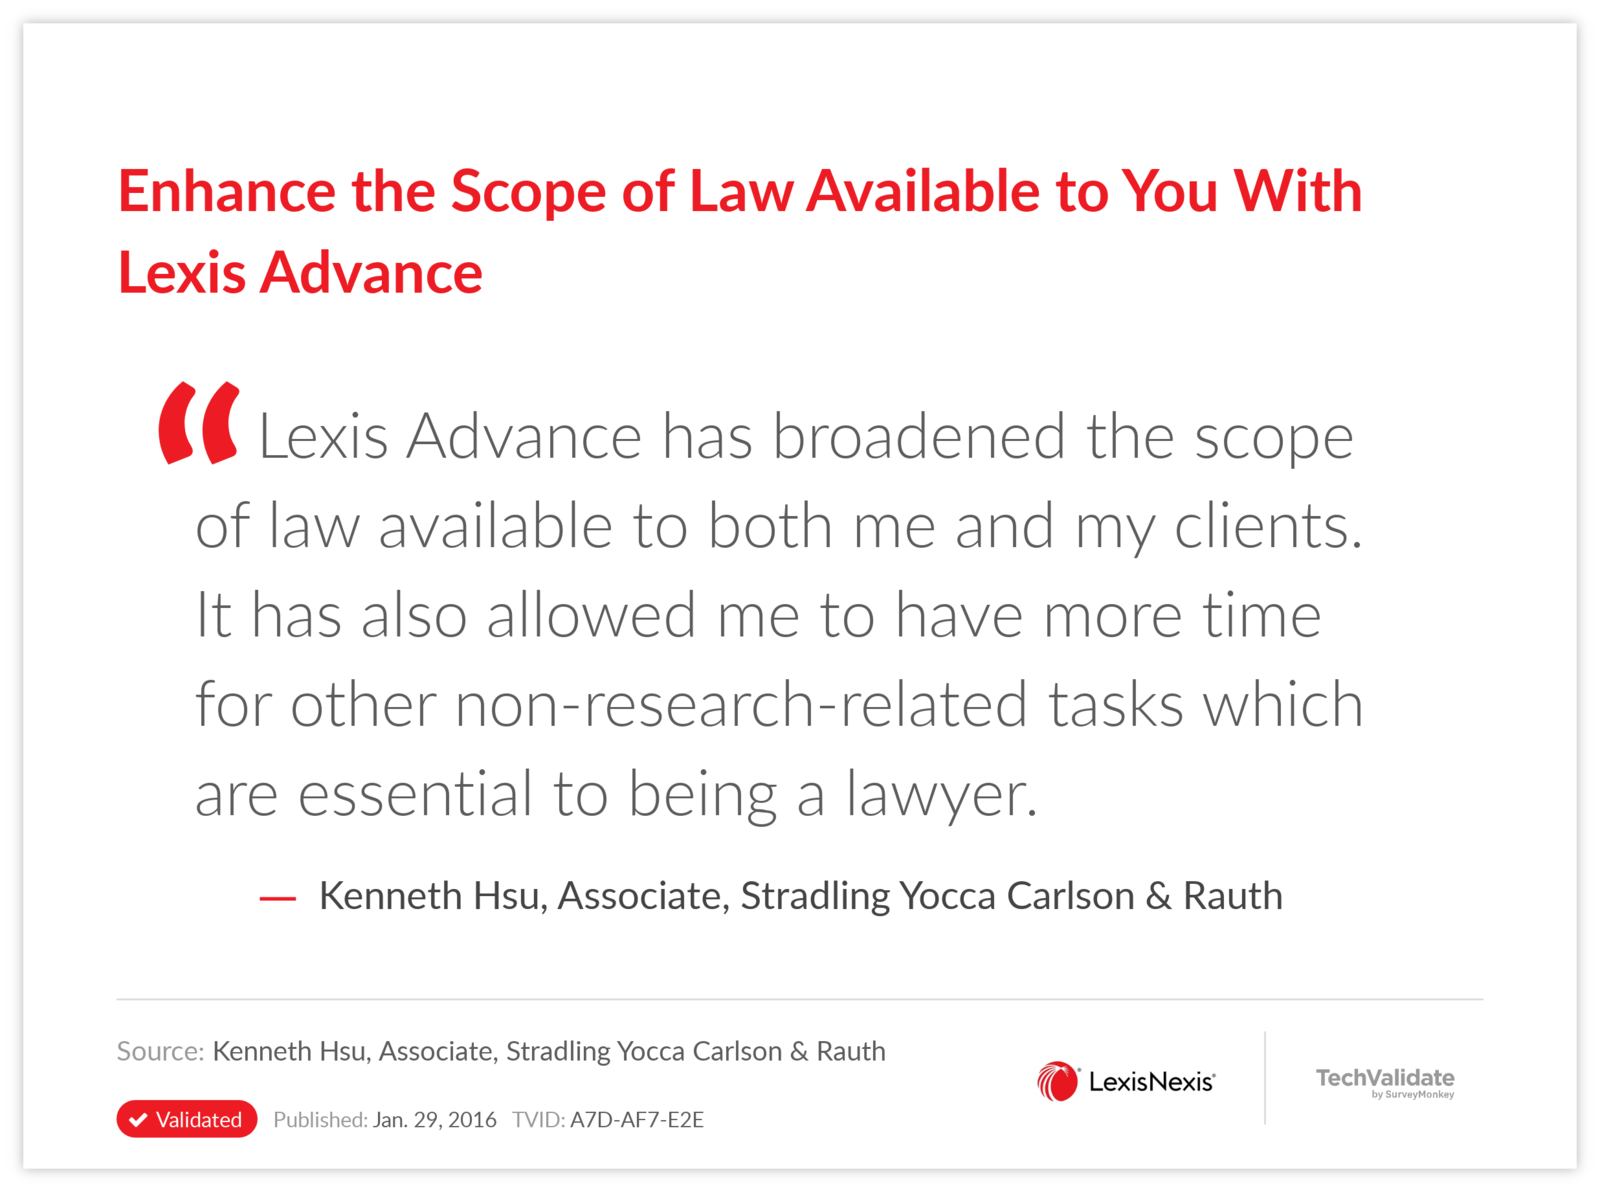 Enhance the Scope of Law Available to You With Lexis Advance